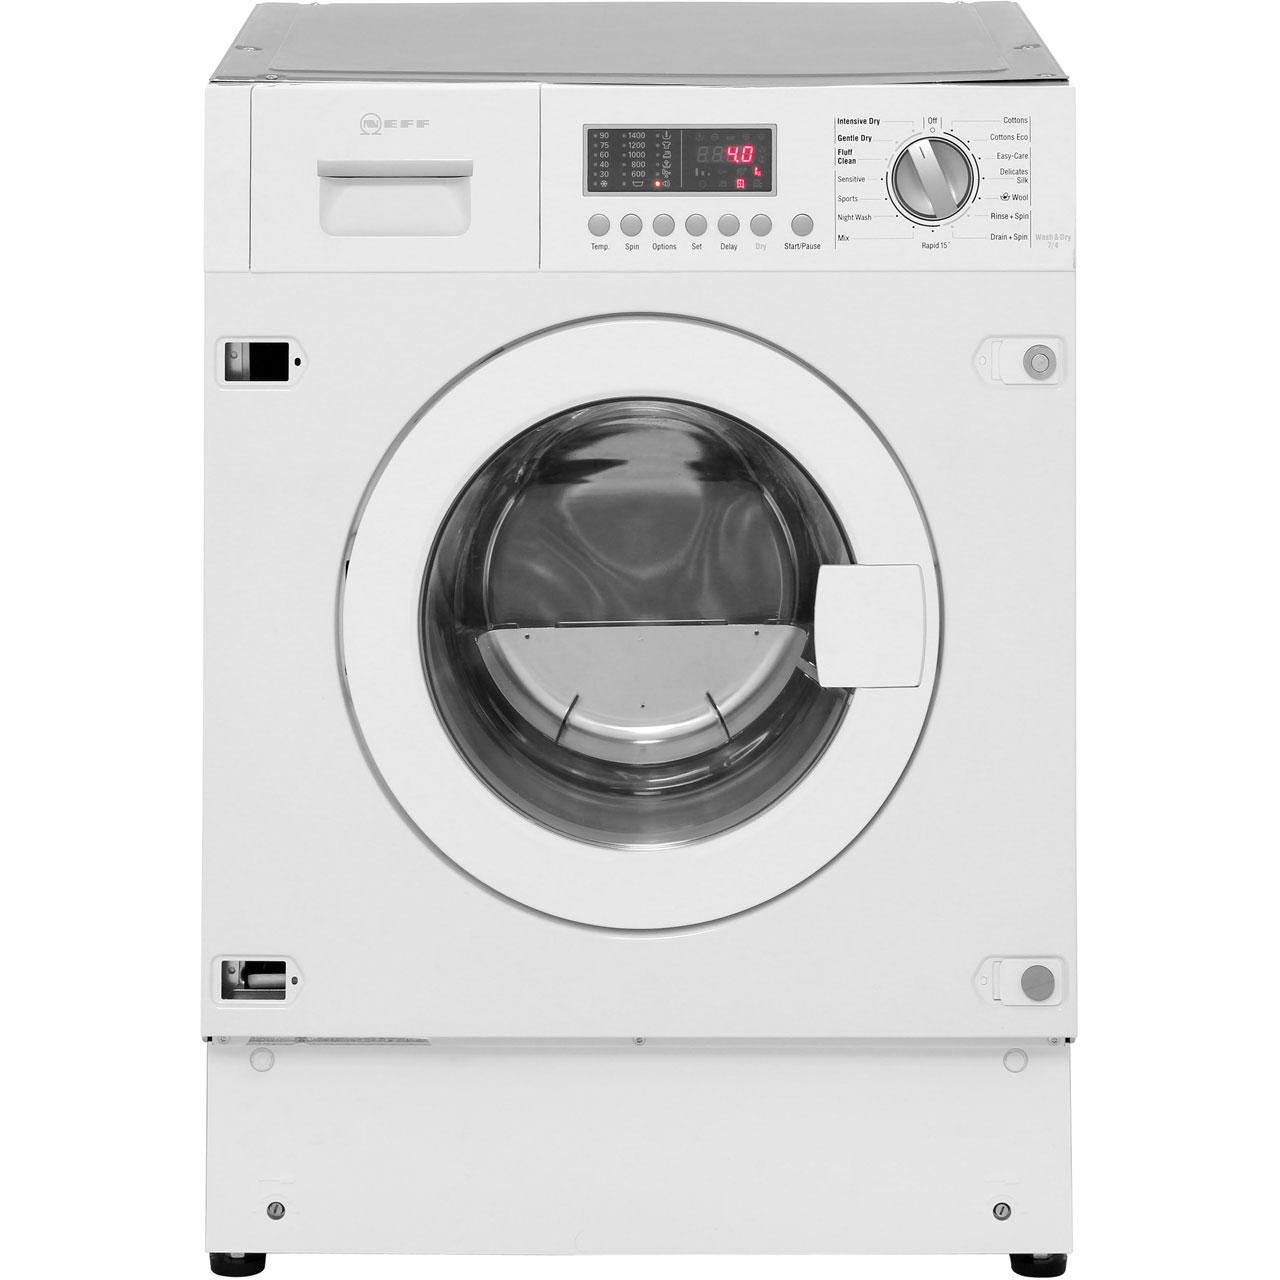 Neff V6540X1GB Integrated 7Kg / 4Kg Washer Dryer with 1400 rpm Review